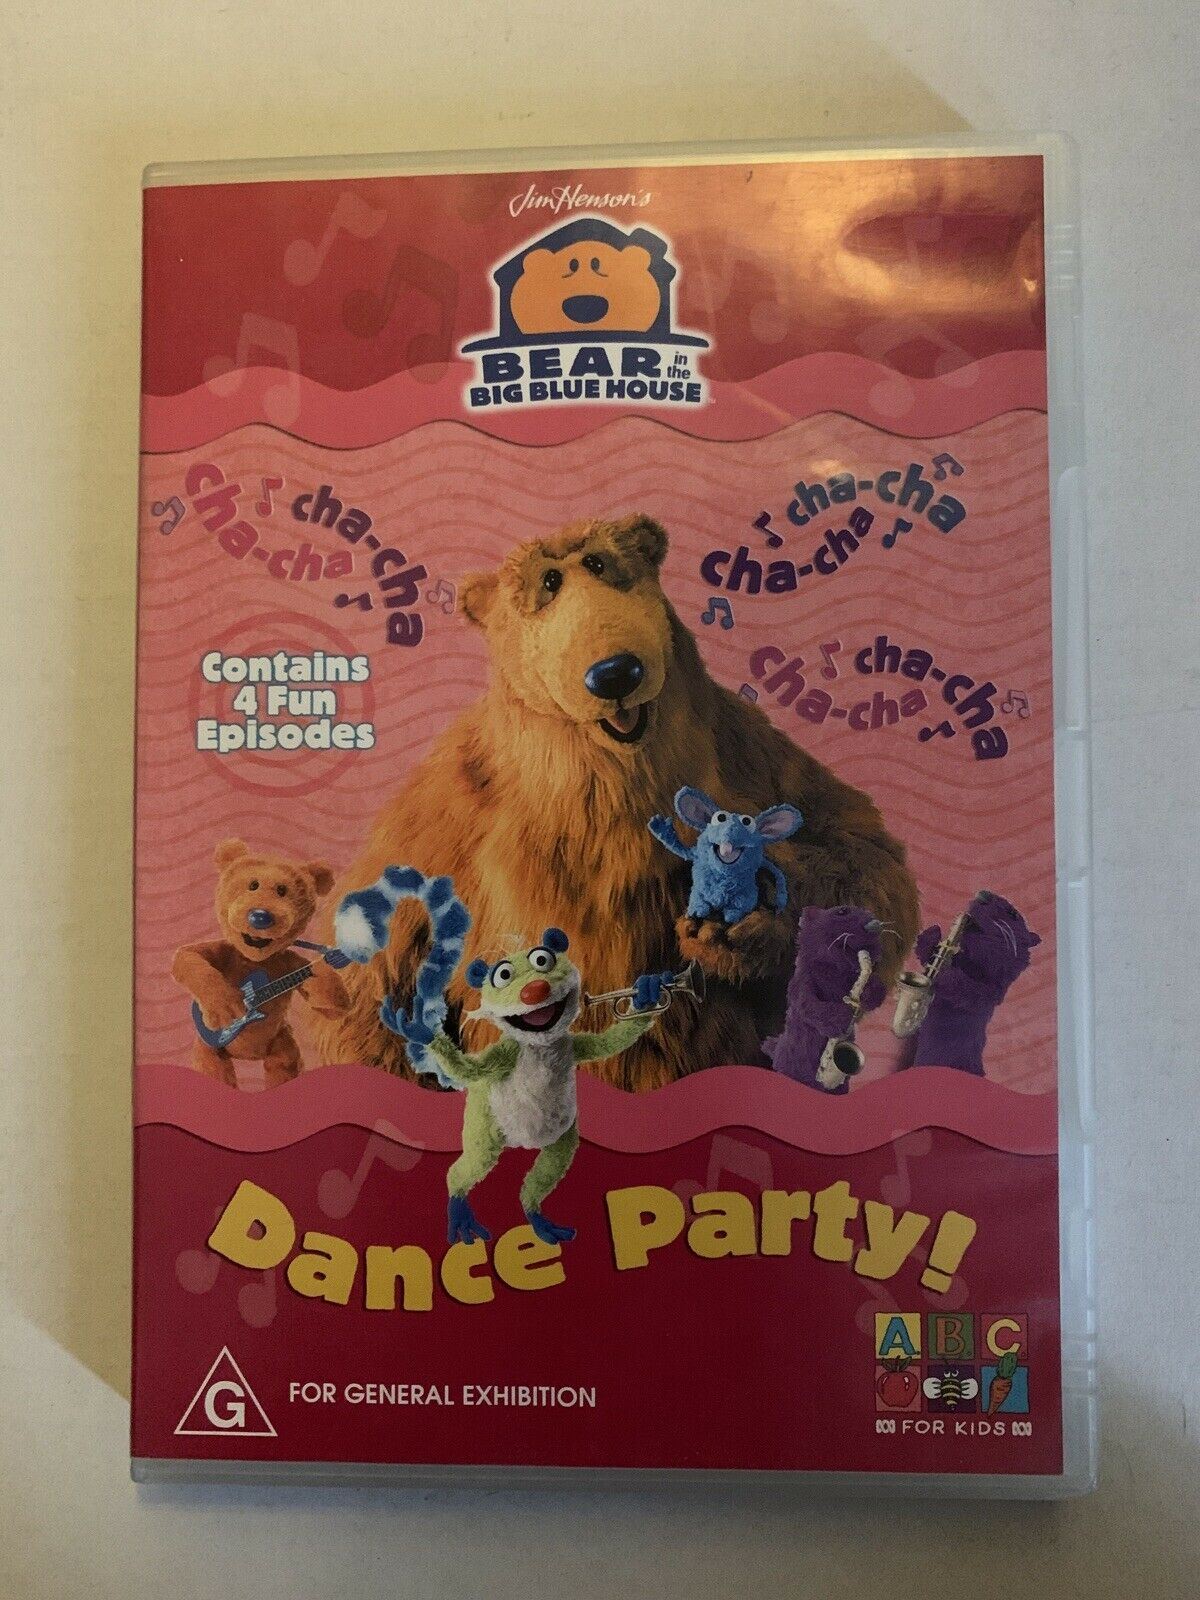 Bear In The Big Blue House - Dance Party (DVD, 2004) ABC Kids. region 4